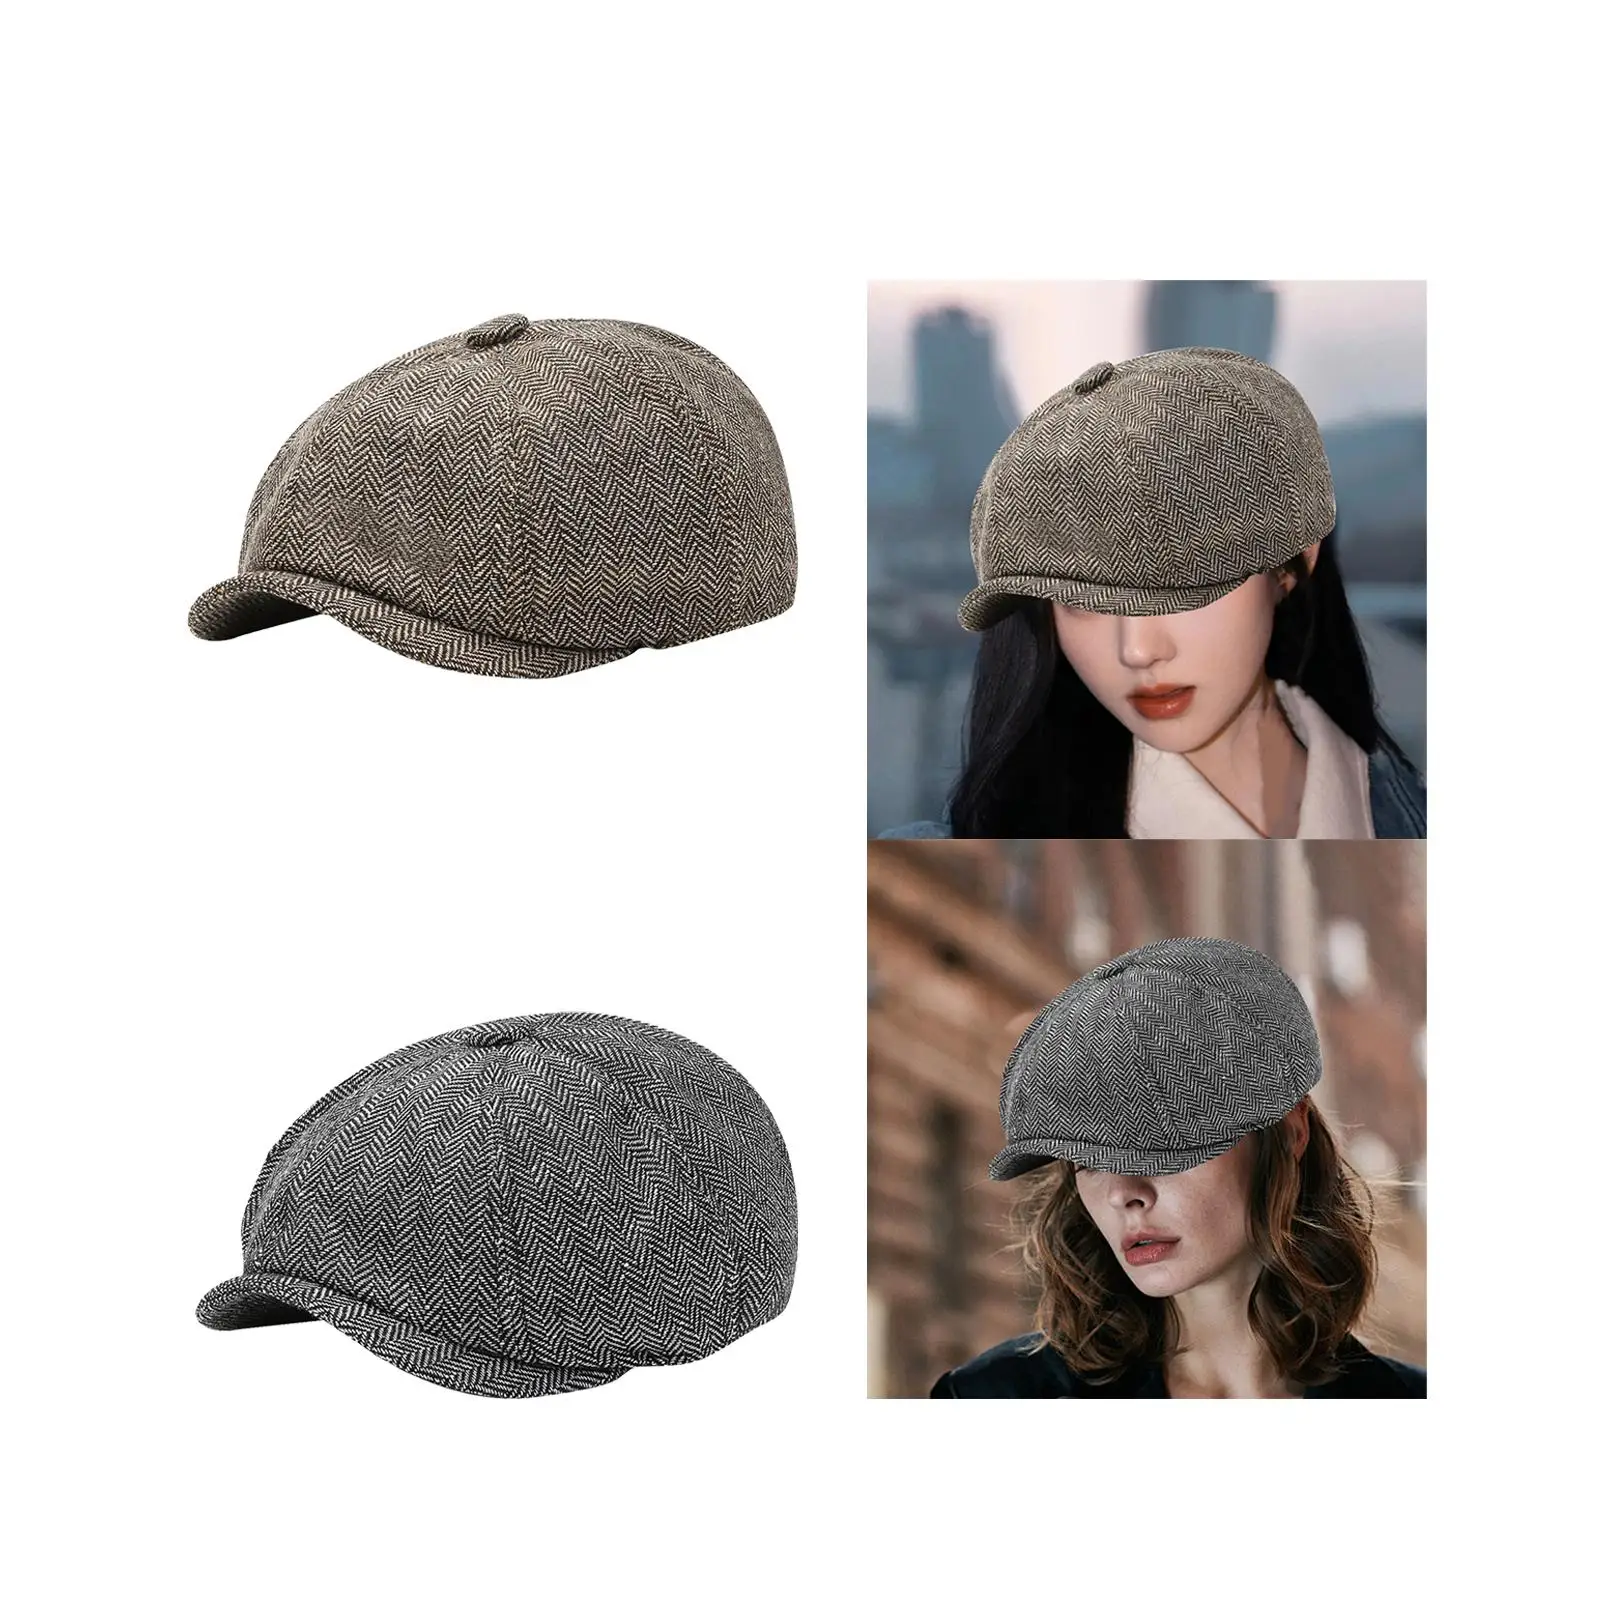 Beret Hat Cap Cabbie Hat Brith Spring Gift Warm Octagal Hat Hat for Shopping Outdoor Driving Traveling